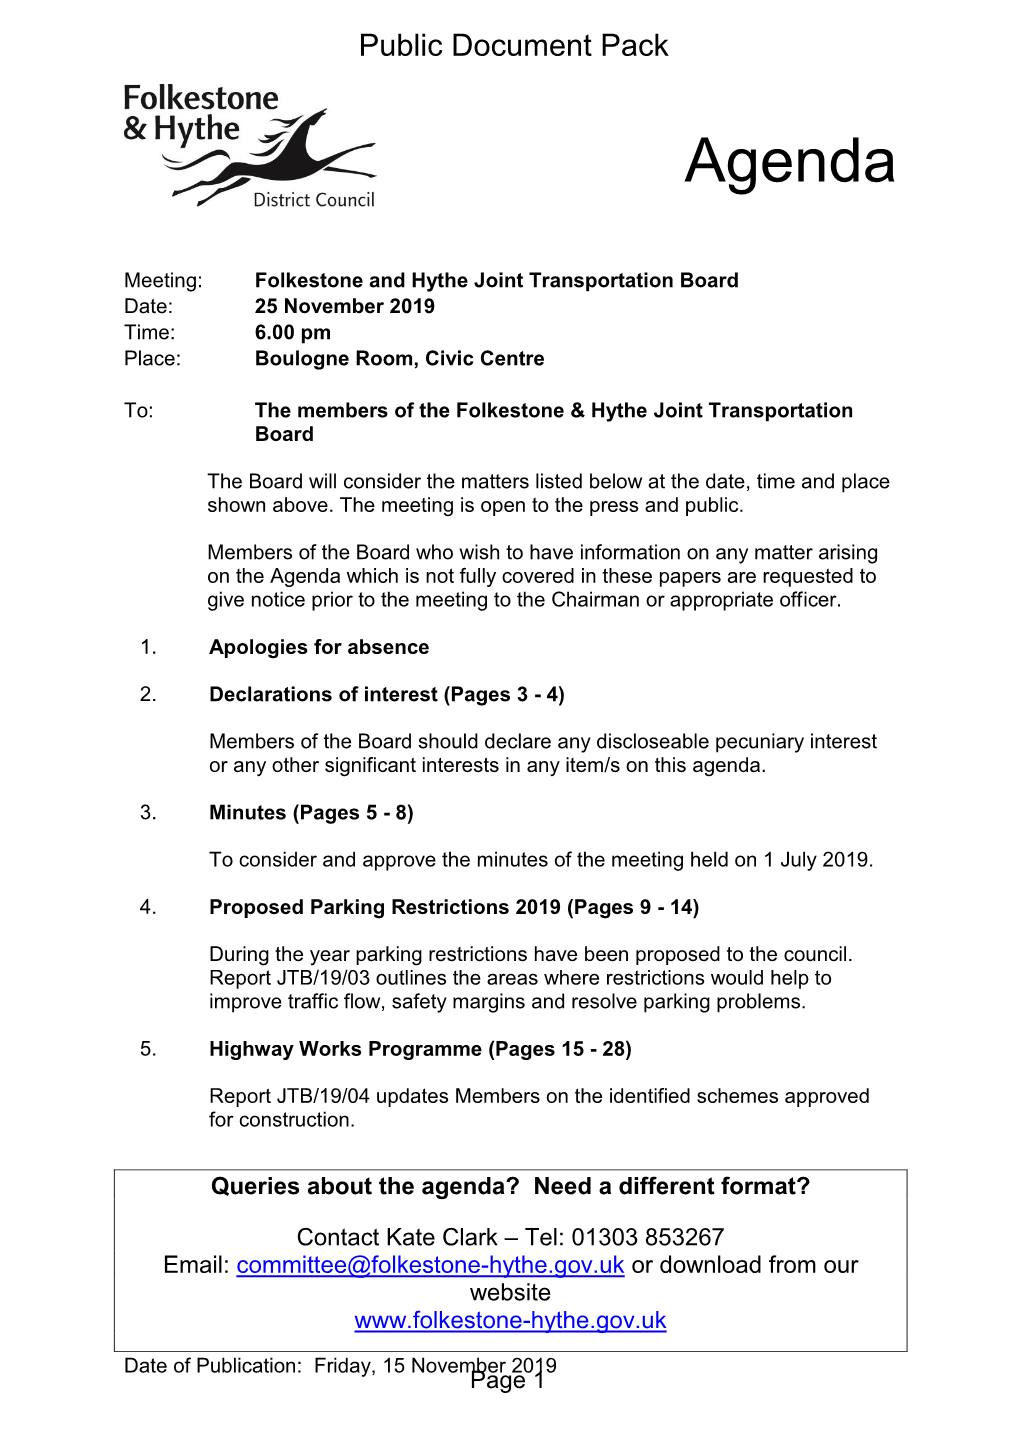 (Public Pack)Agenda Document for Folkestone and Hythe Joint Transportation Board, 25/11/2019 18:00